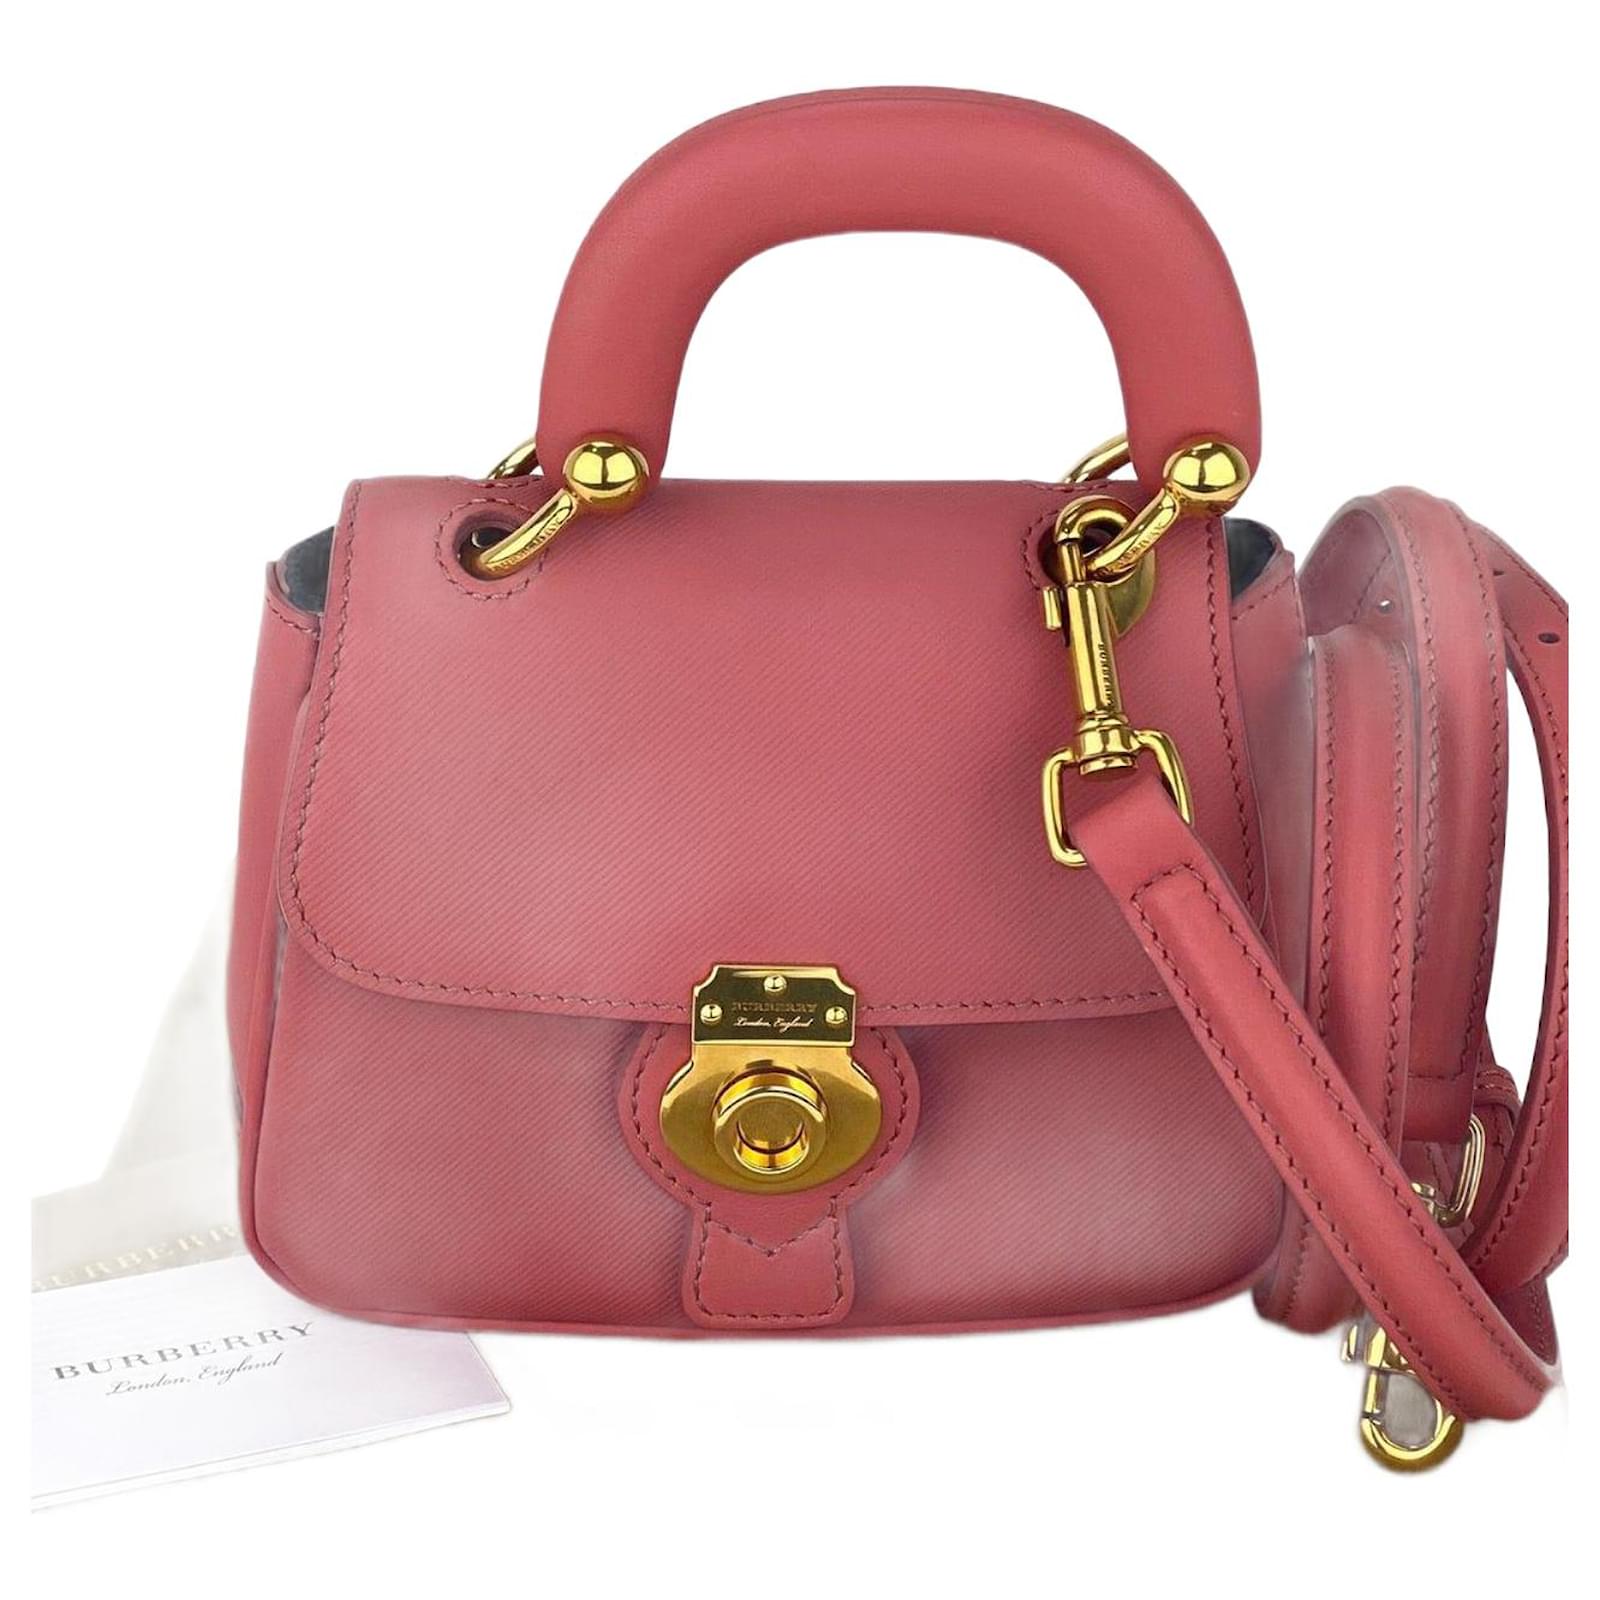 Burberry Small DK88 Top Handle Bag in Blossom Pink Leather Crossbody Bag  Pre owned  - Joli Closet